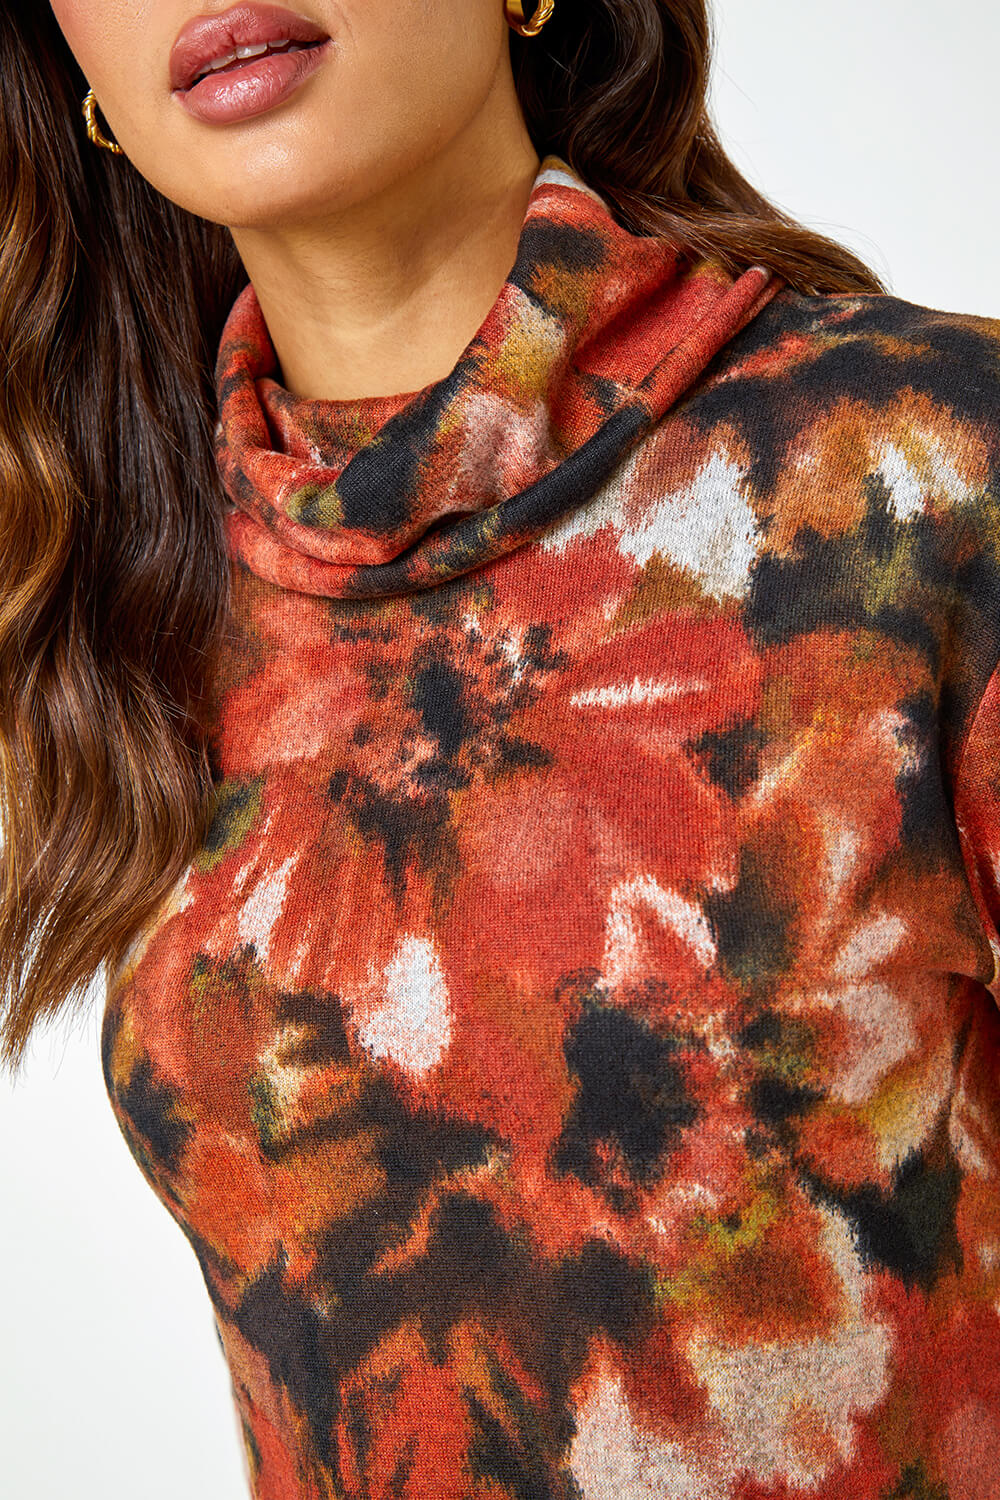 Rust Floral Tie Dye Print Tunic Stretch Dress, Image 5 of 5